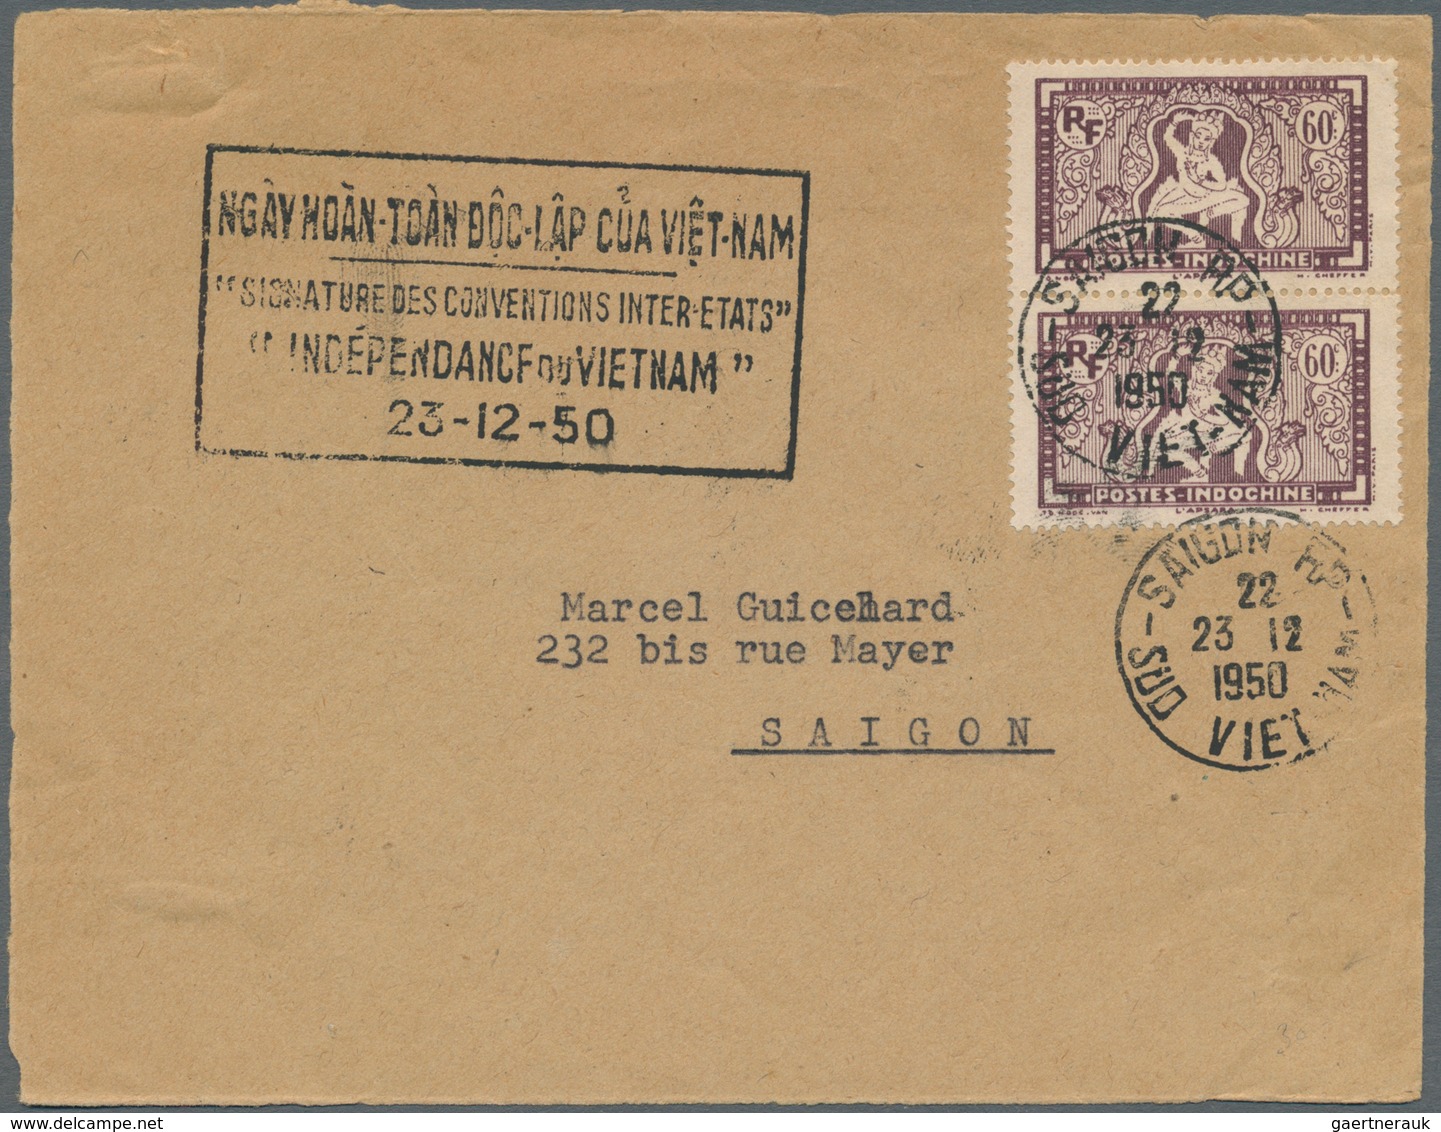 22577 Französisch-Indochina: 1898/1953: Very fine lot of 22 envelopes, used picture postcards and postal s